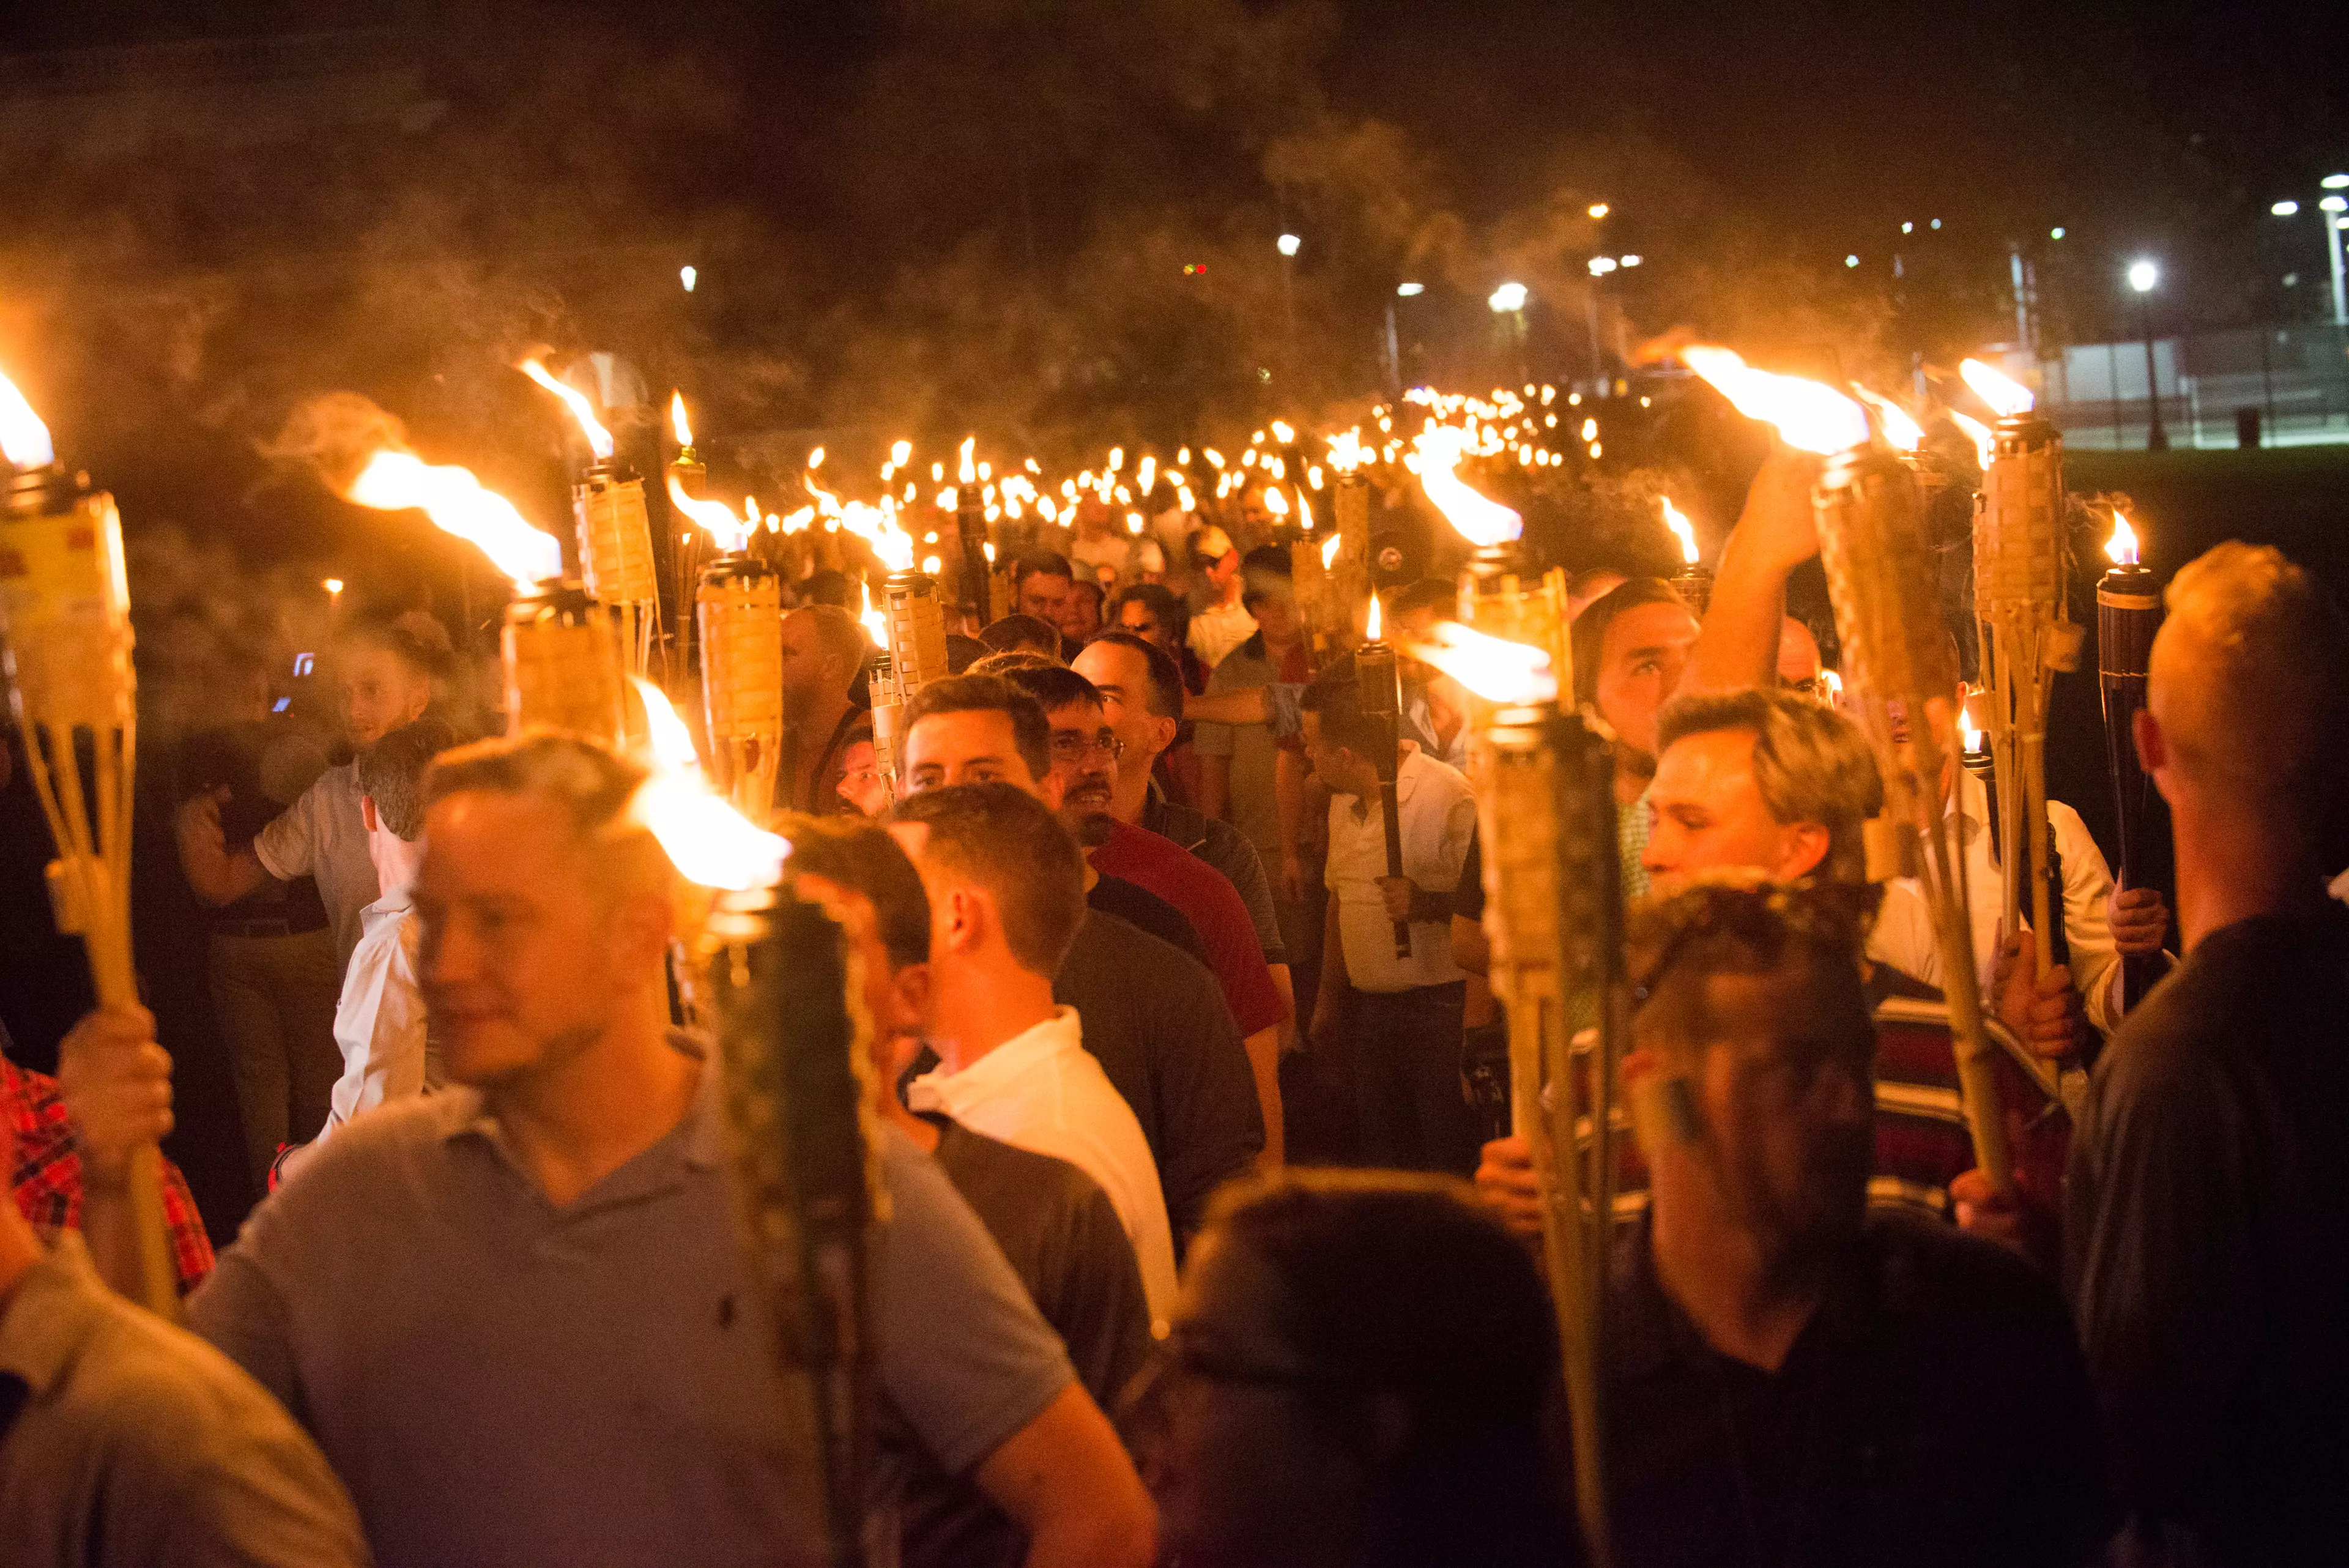 The 'Unite The Right' protest event in Charlottesville was hosted on Facebook.